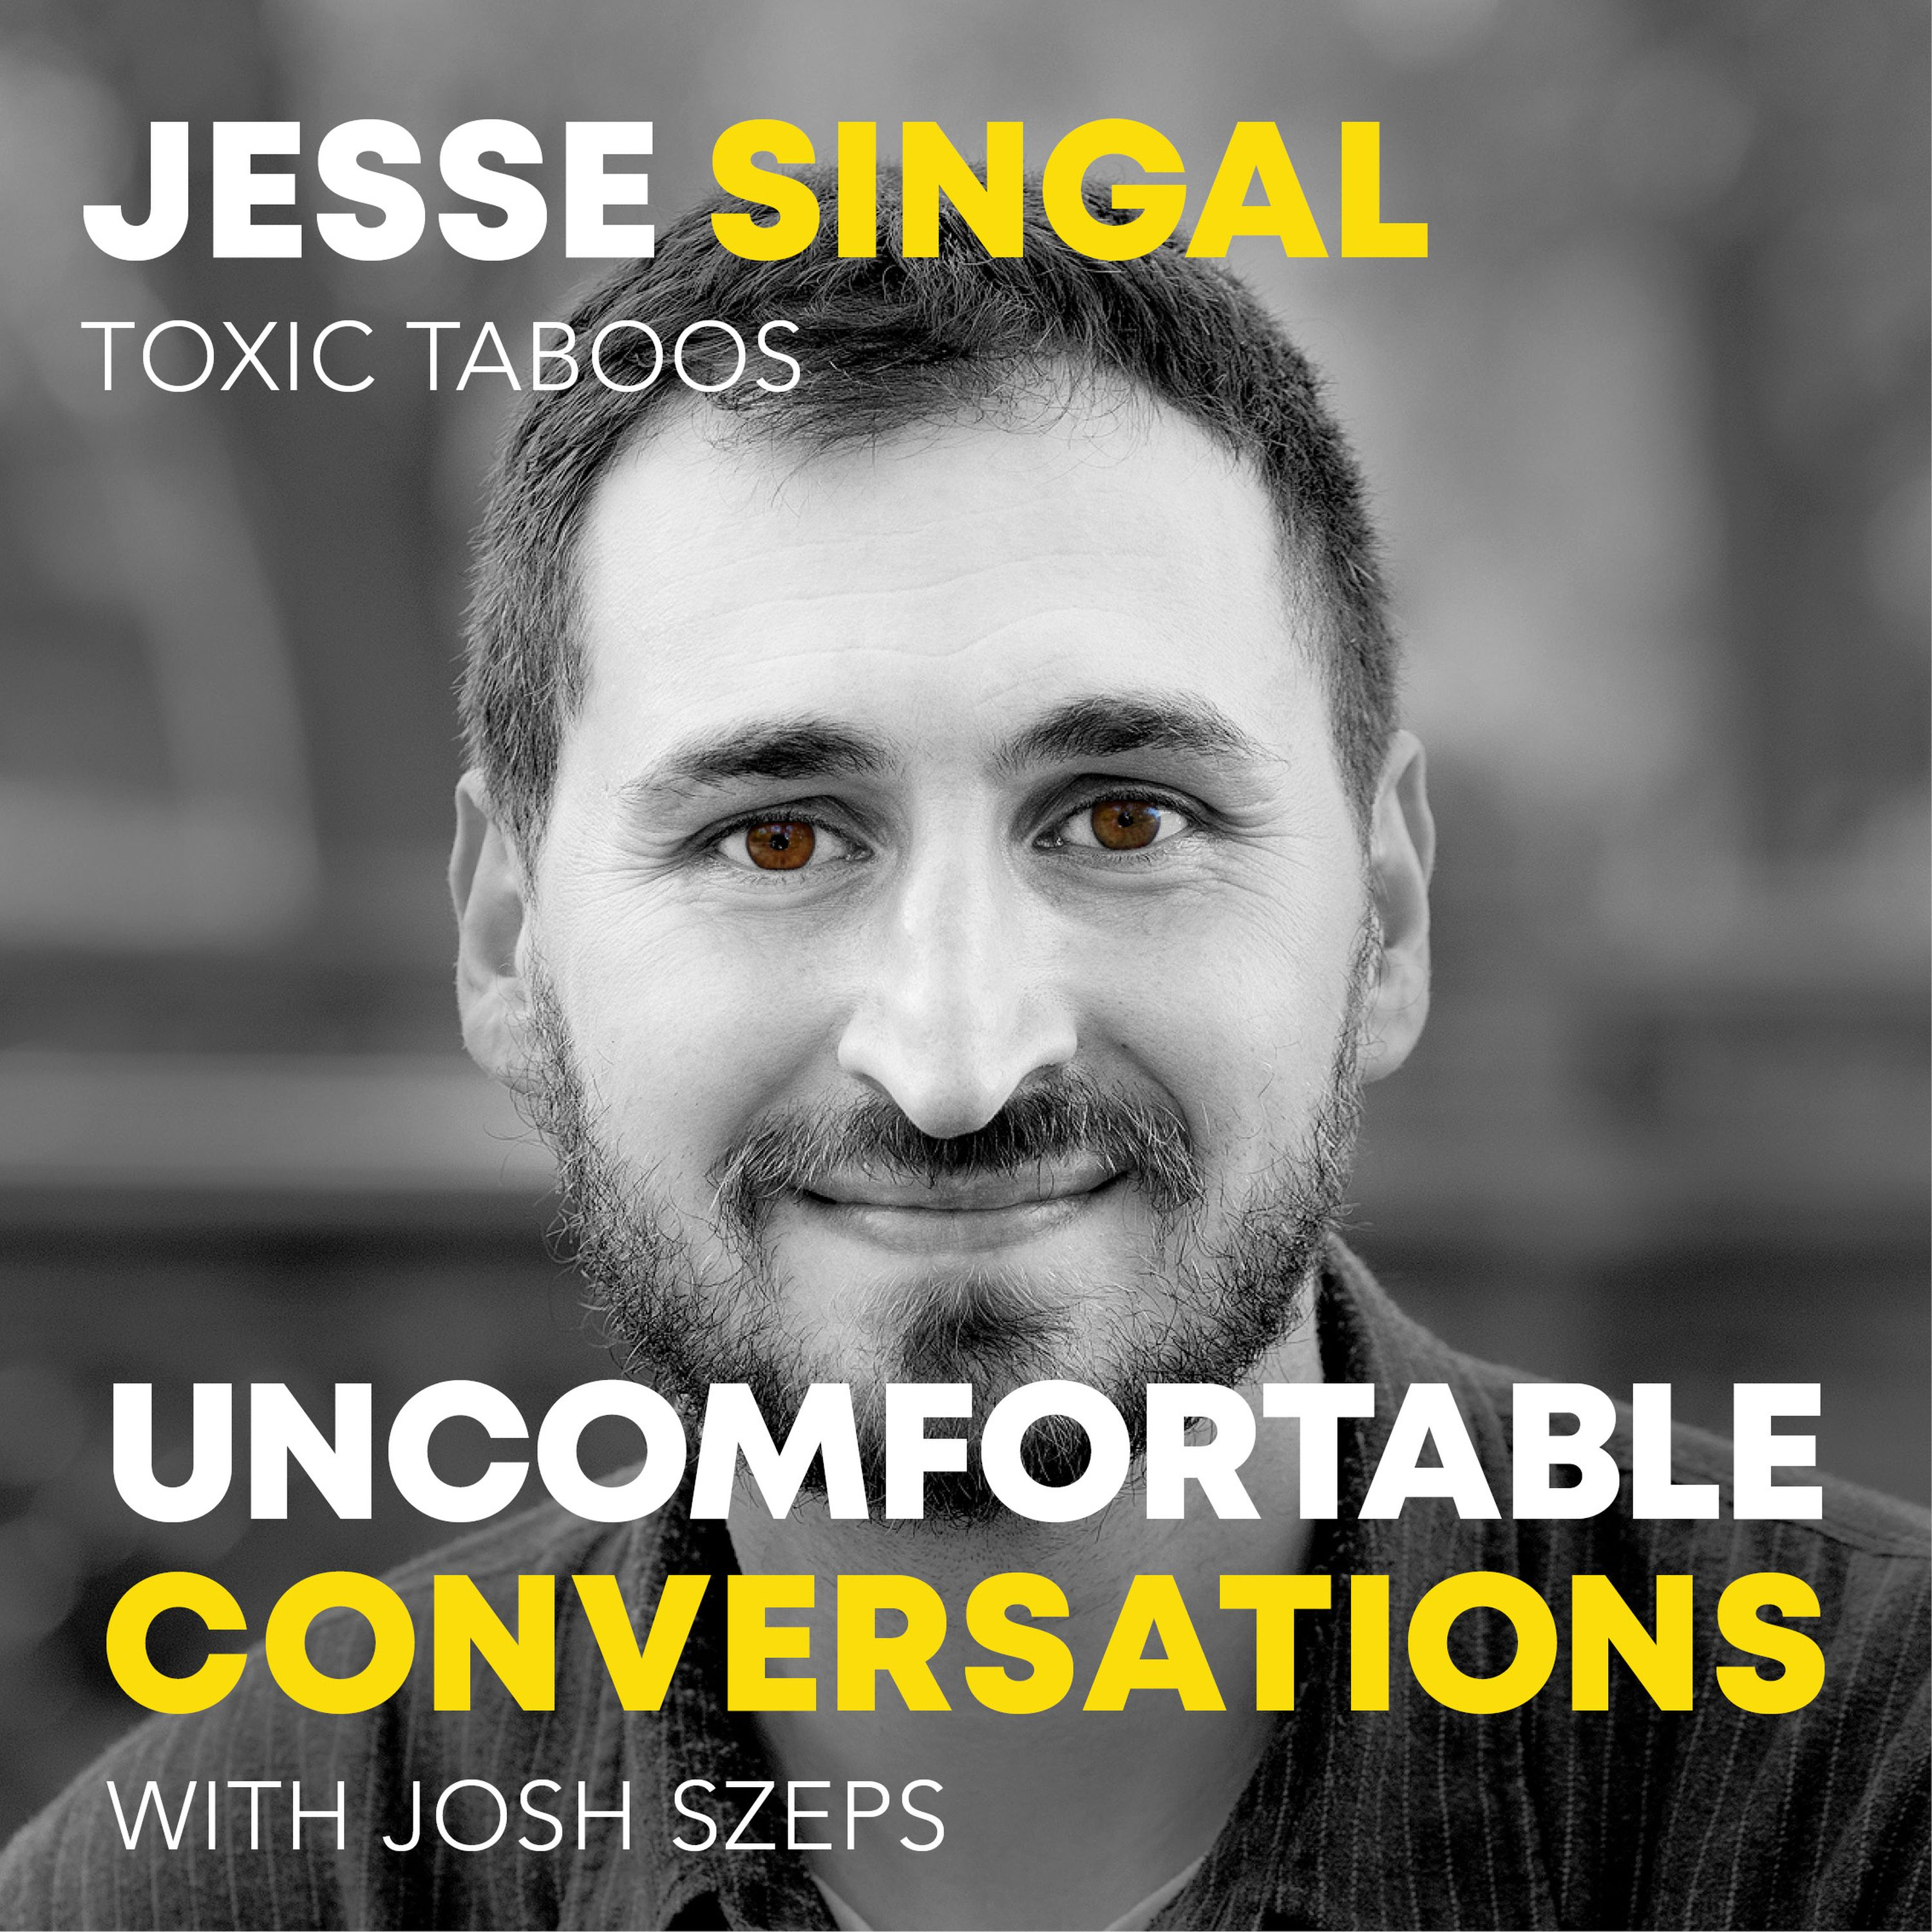 "Toxic Taboos" with Jesse Singal